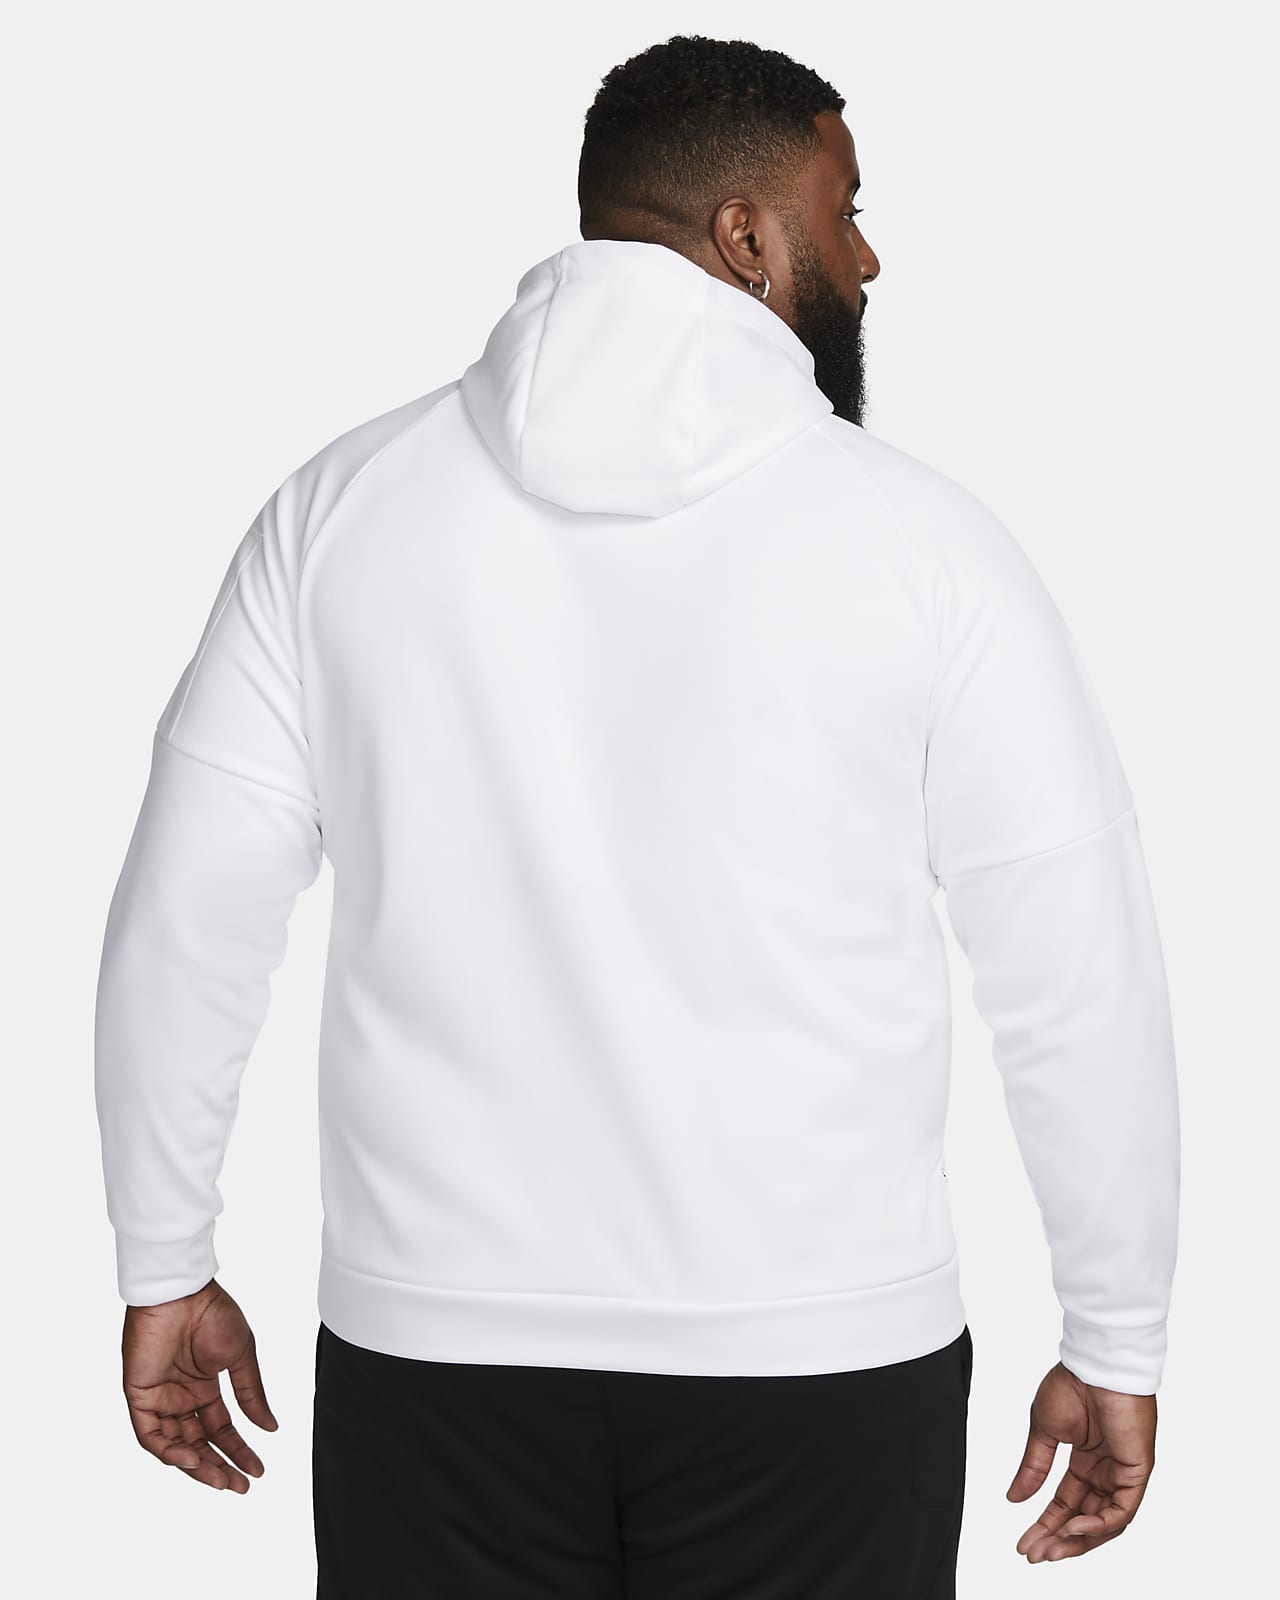 MEN'S NIKE THERMA PULLOVER HOODIE (ANTHRACITE/WHITE, Small) at  Men's  Clothing store